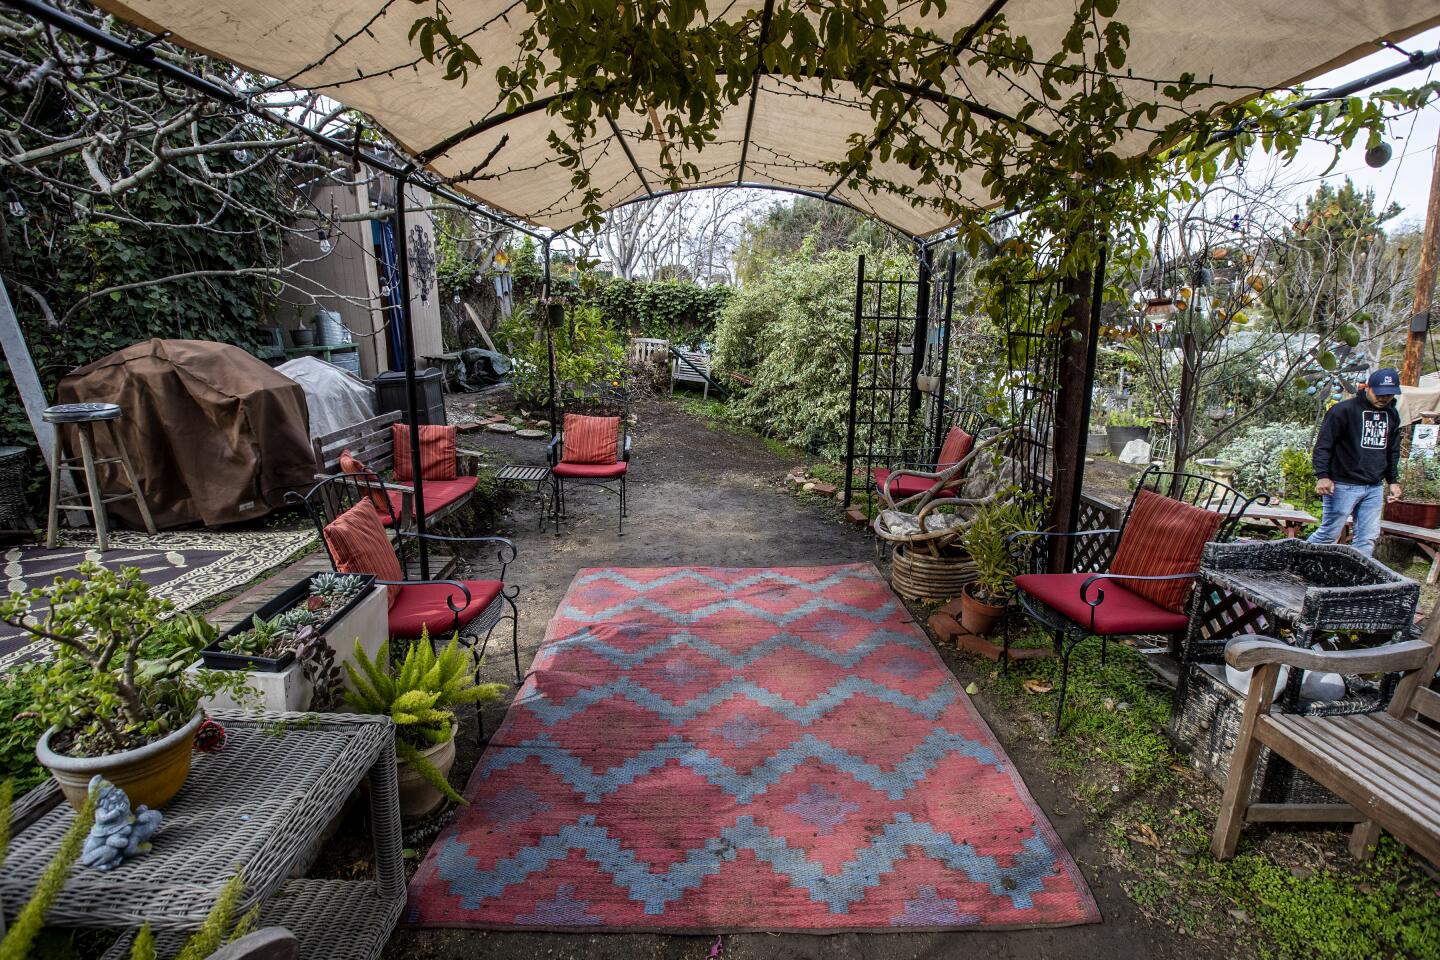 Covered seating area with an outdoor rug